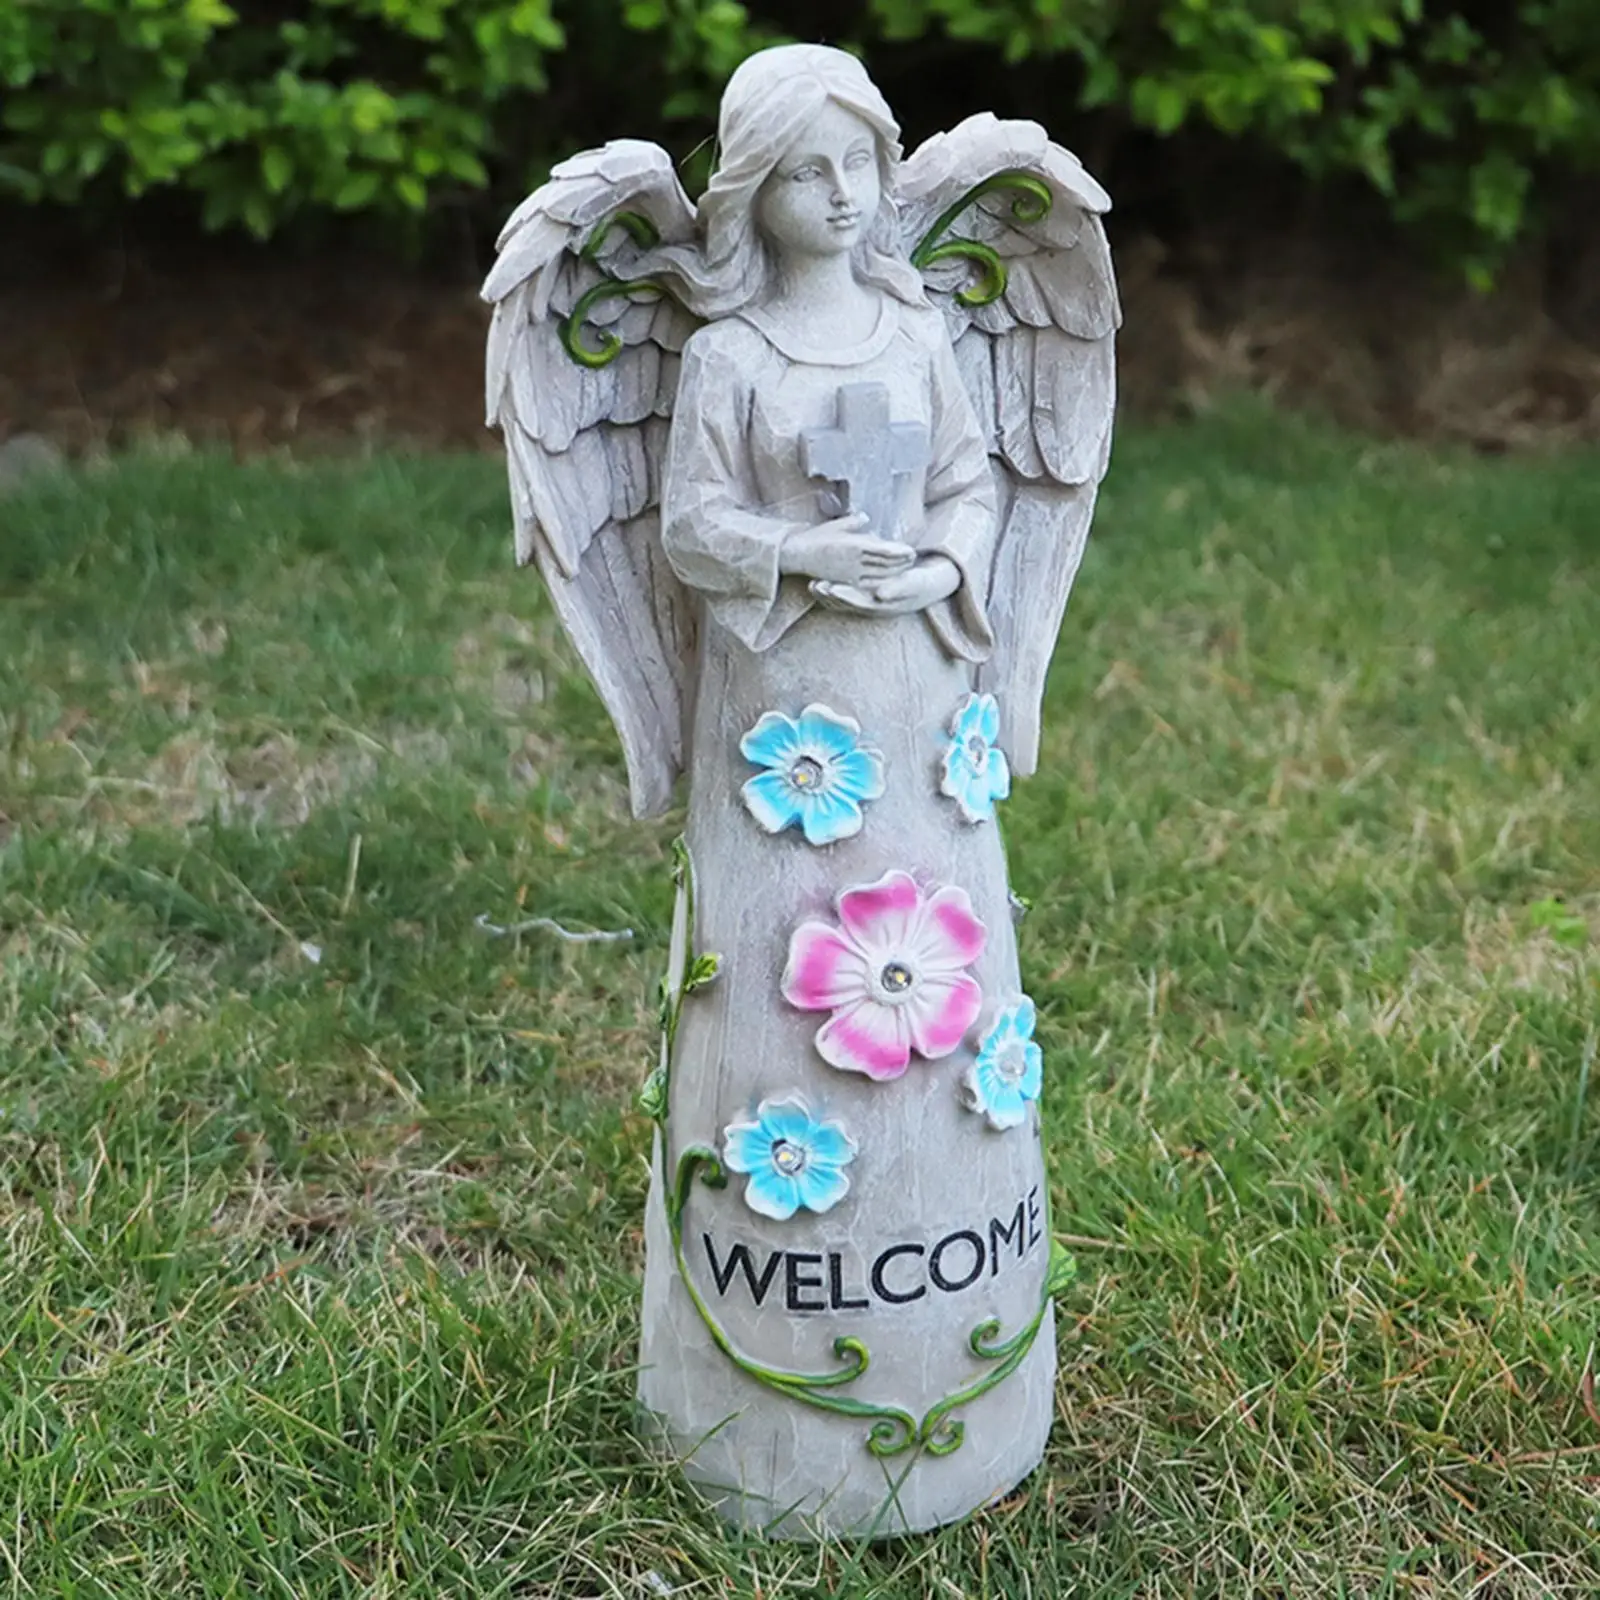 LED Angel Figurine Solar Lamp Sculpture Decor Craft Ornament Praying Welcome Light for Outdoor Garden Living Room Bedroom Patio